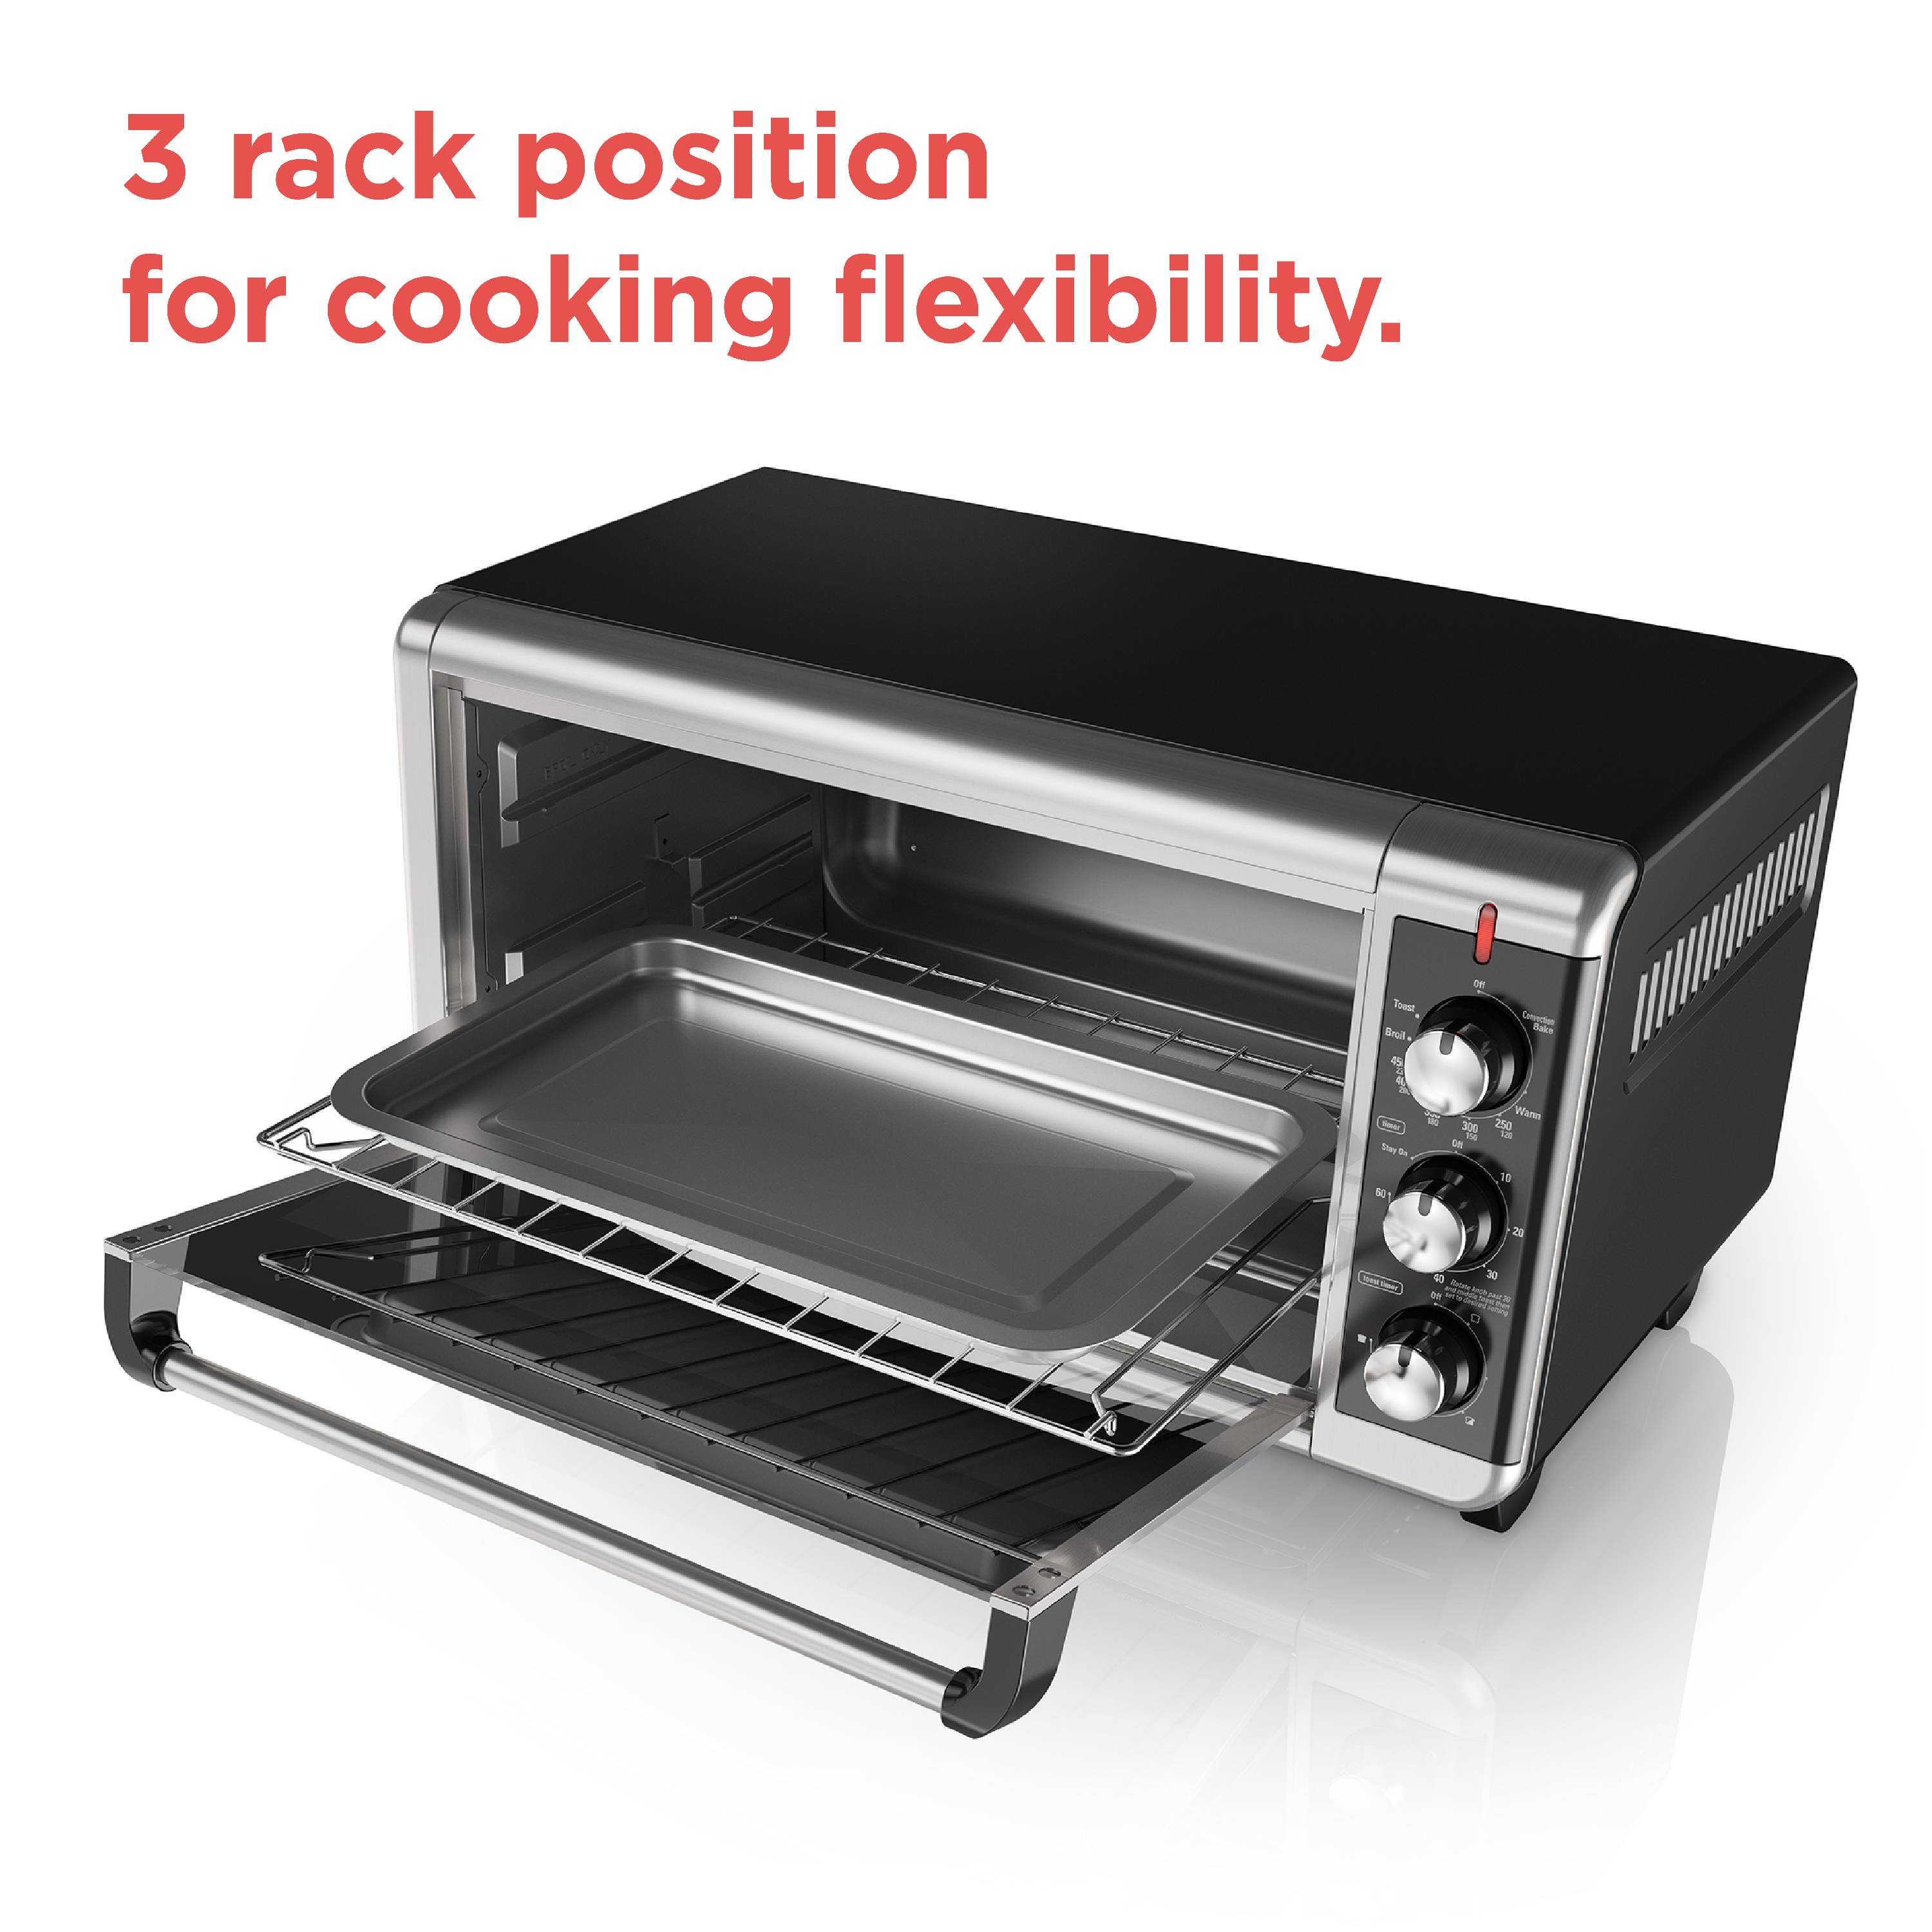 BLACK+DECKER 8-Slice Extra-Wide Stainless Steel/Black Convection Countertop Toaster Oven, Stainless Steel, TO3250XSB - image 4 of 14